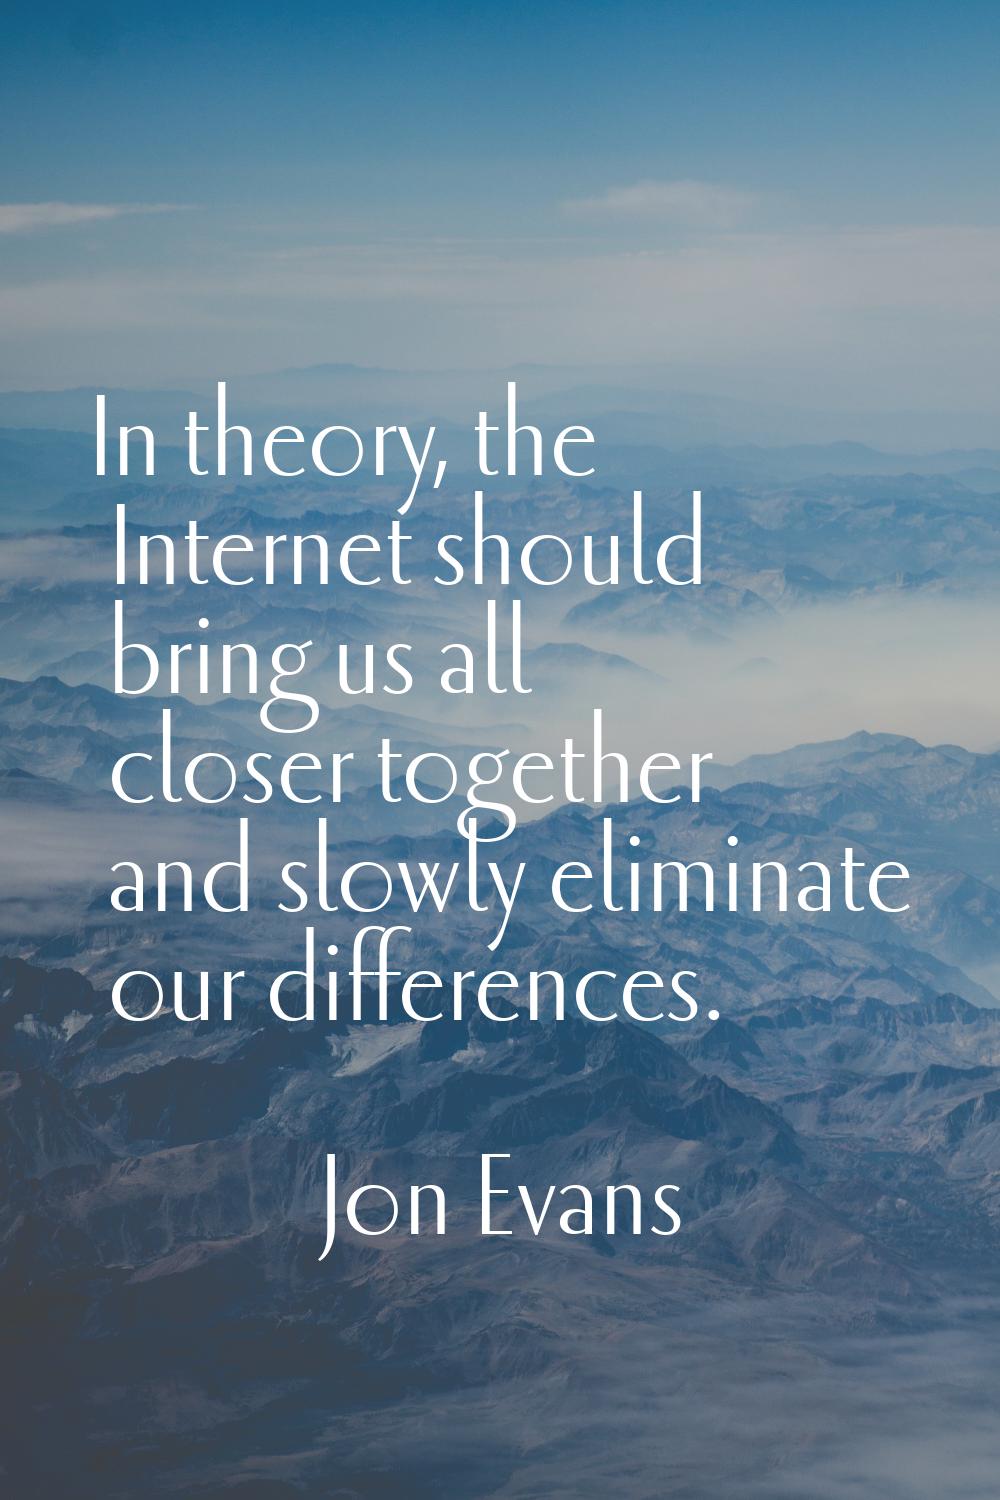 In theory, the Internet should bring us all closer together and slowly eliminate our differences.